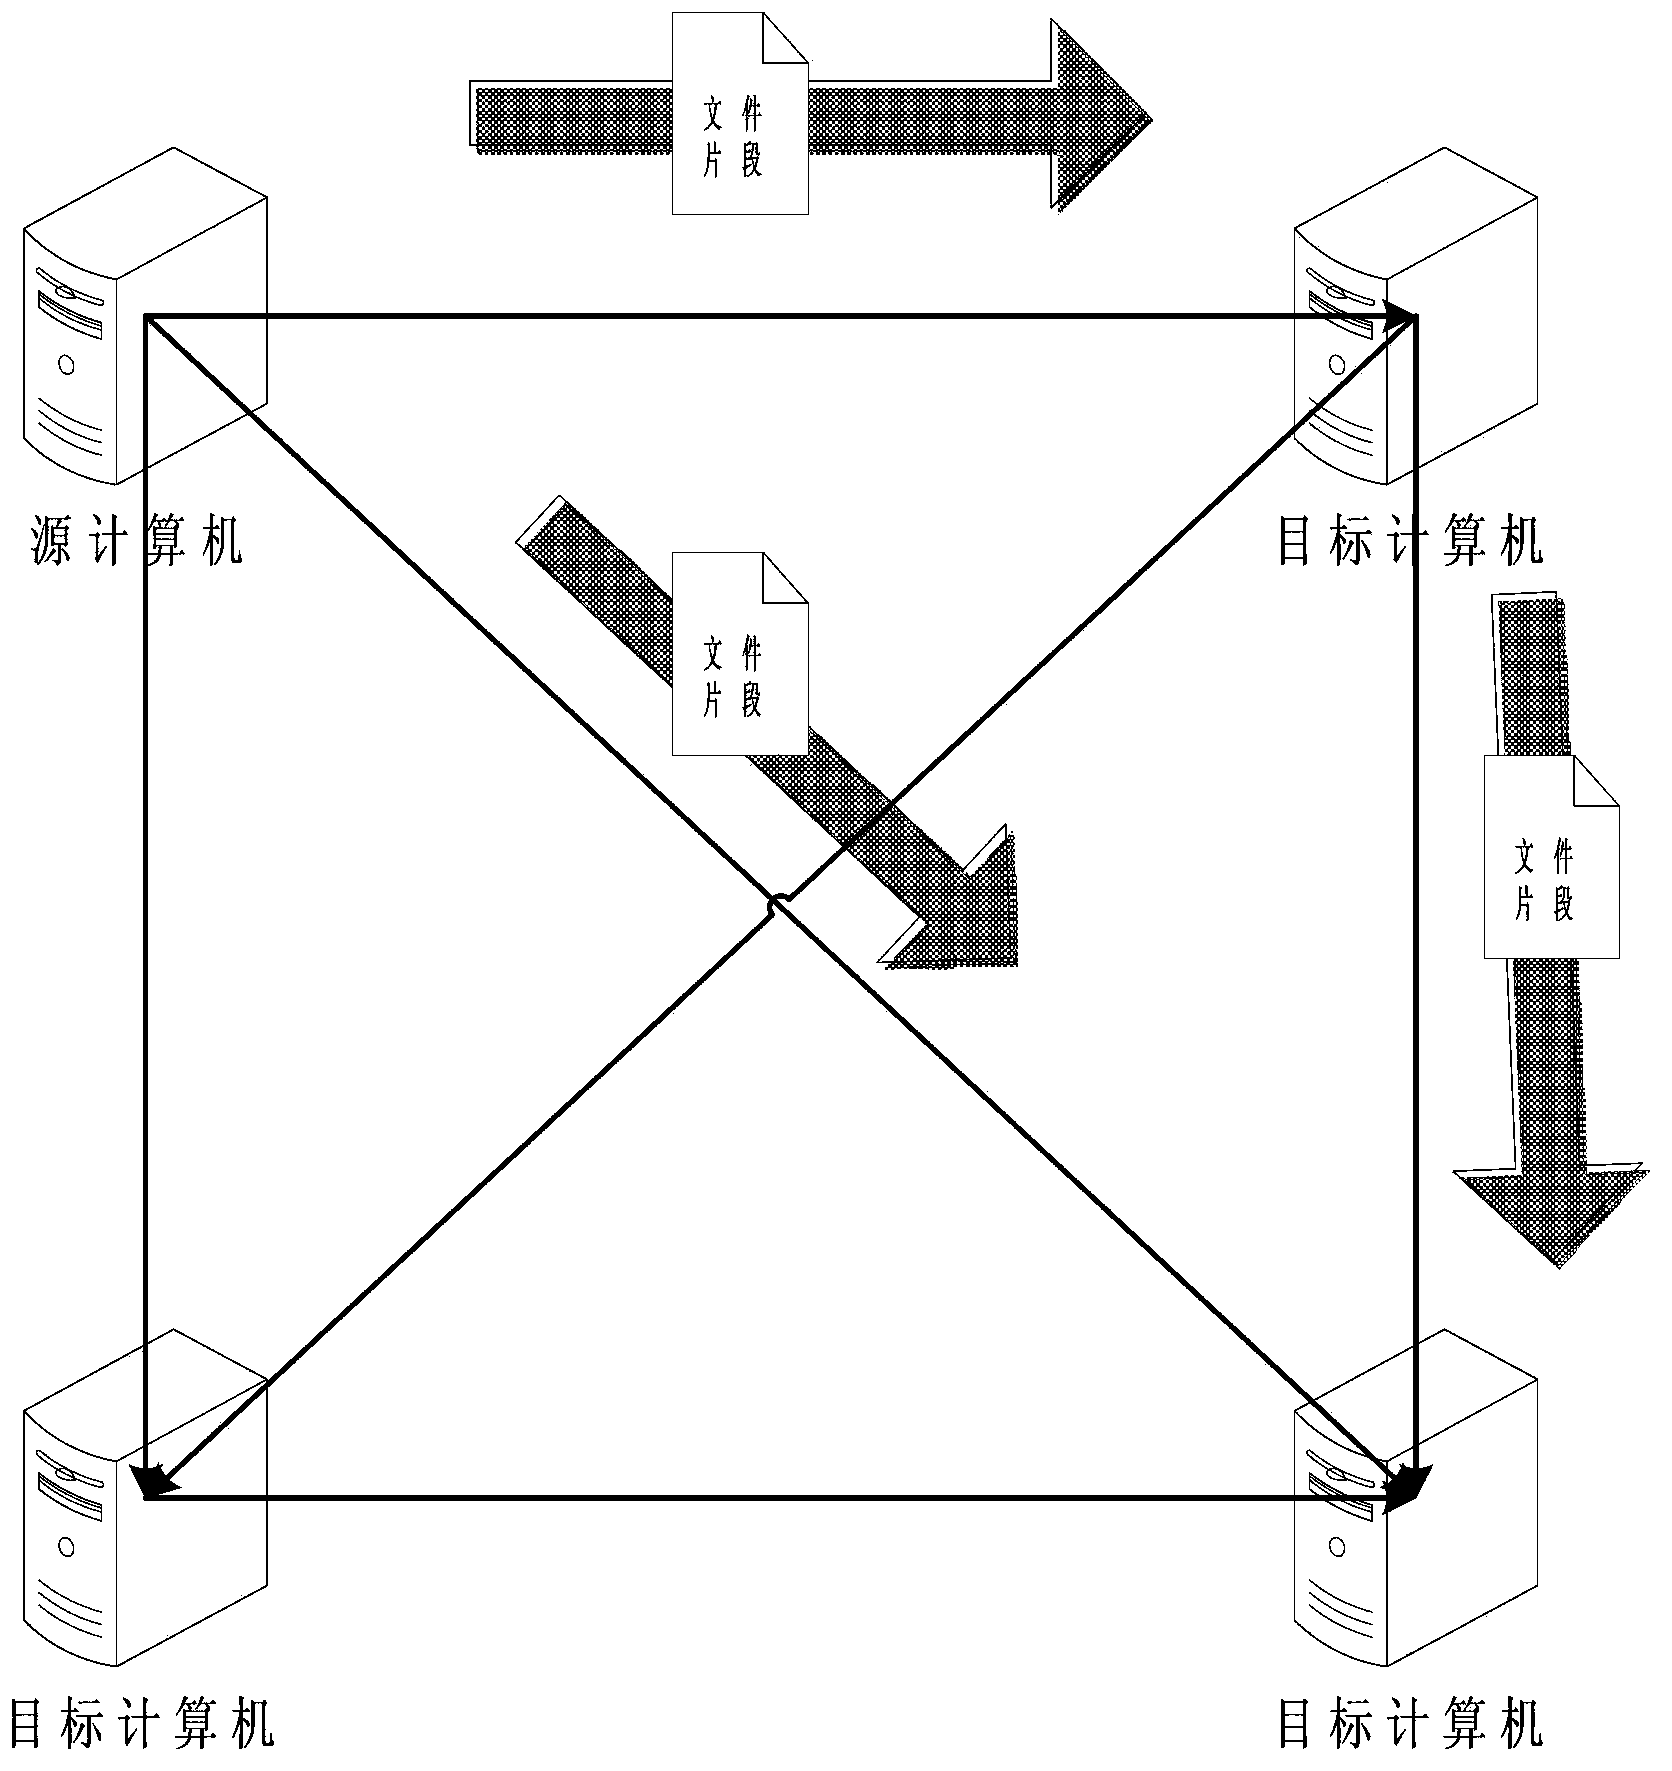 Method for rapidly expanding computer cluster based on P2P network technology